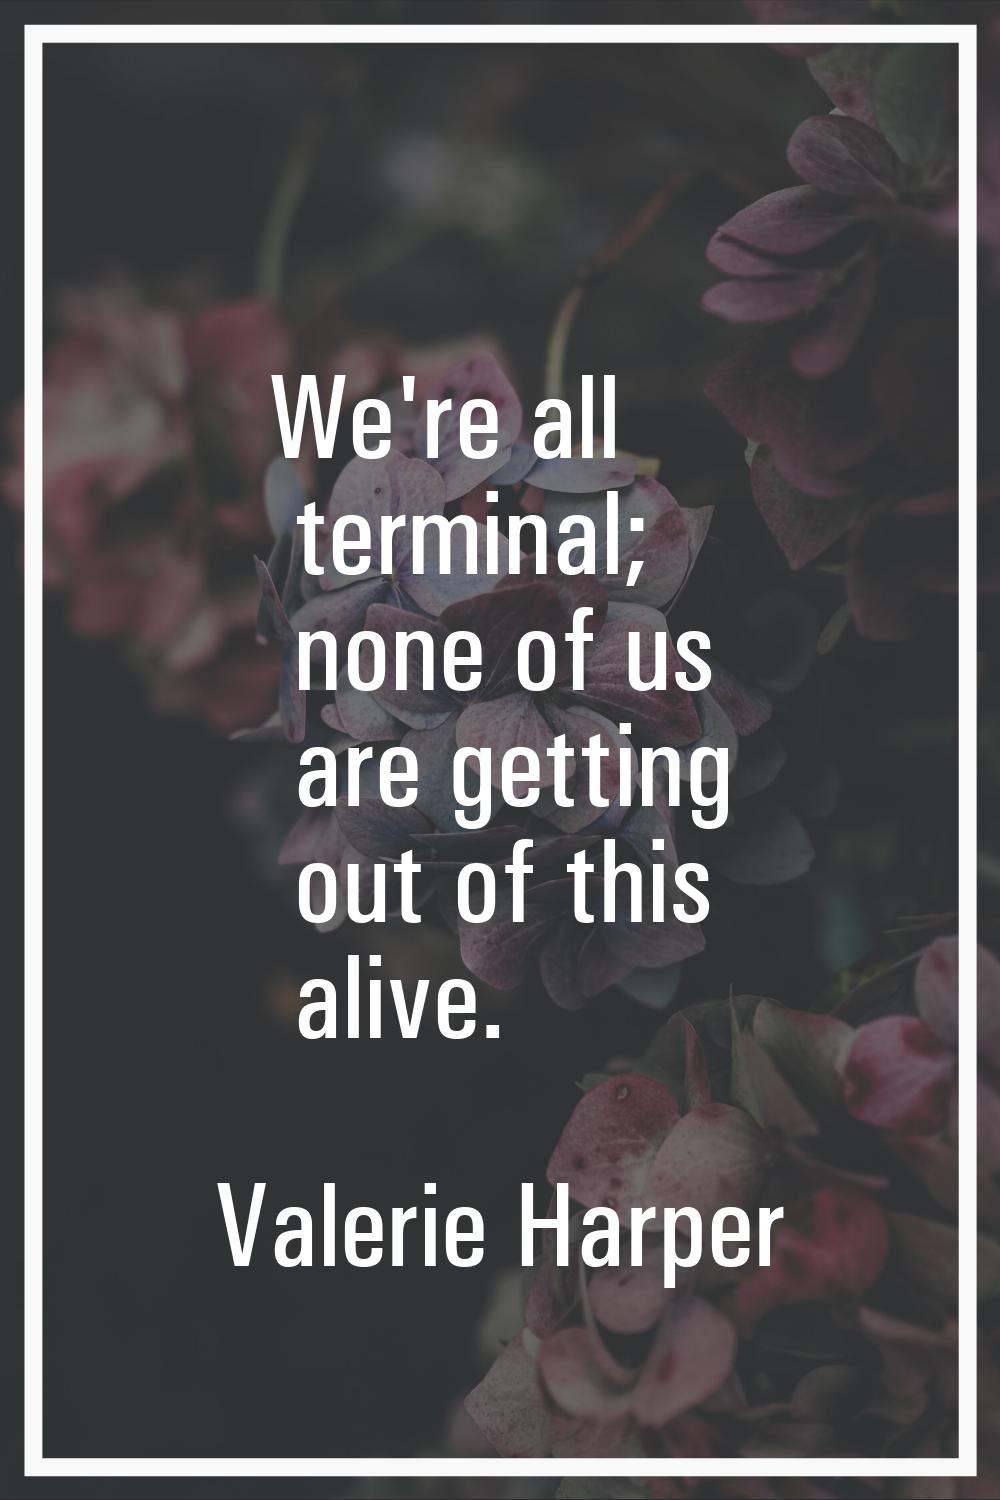 We're all terminal; none of us are getting out of this alive.